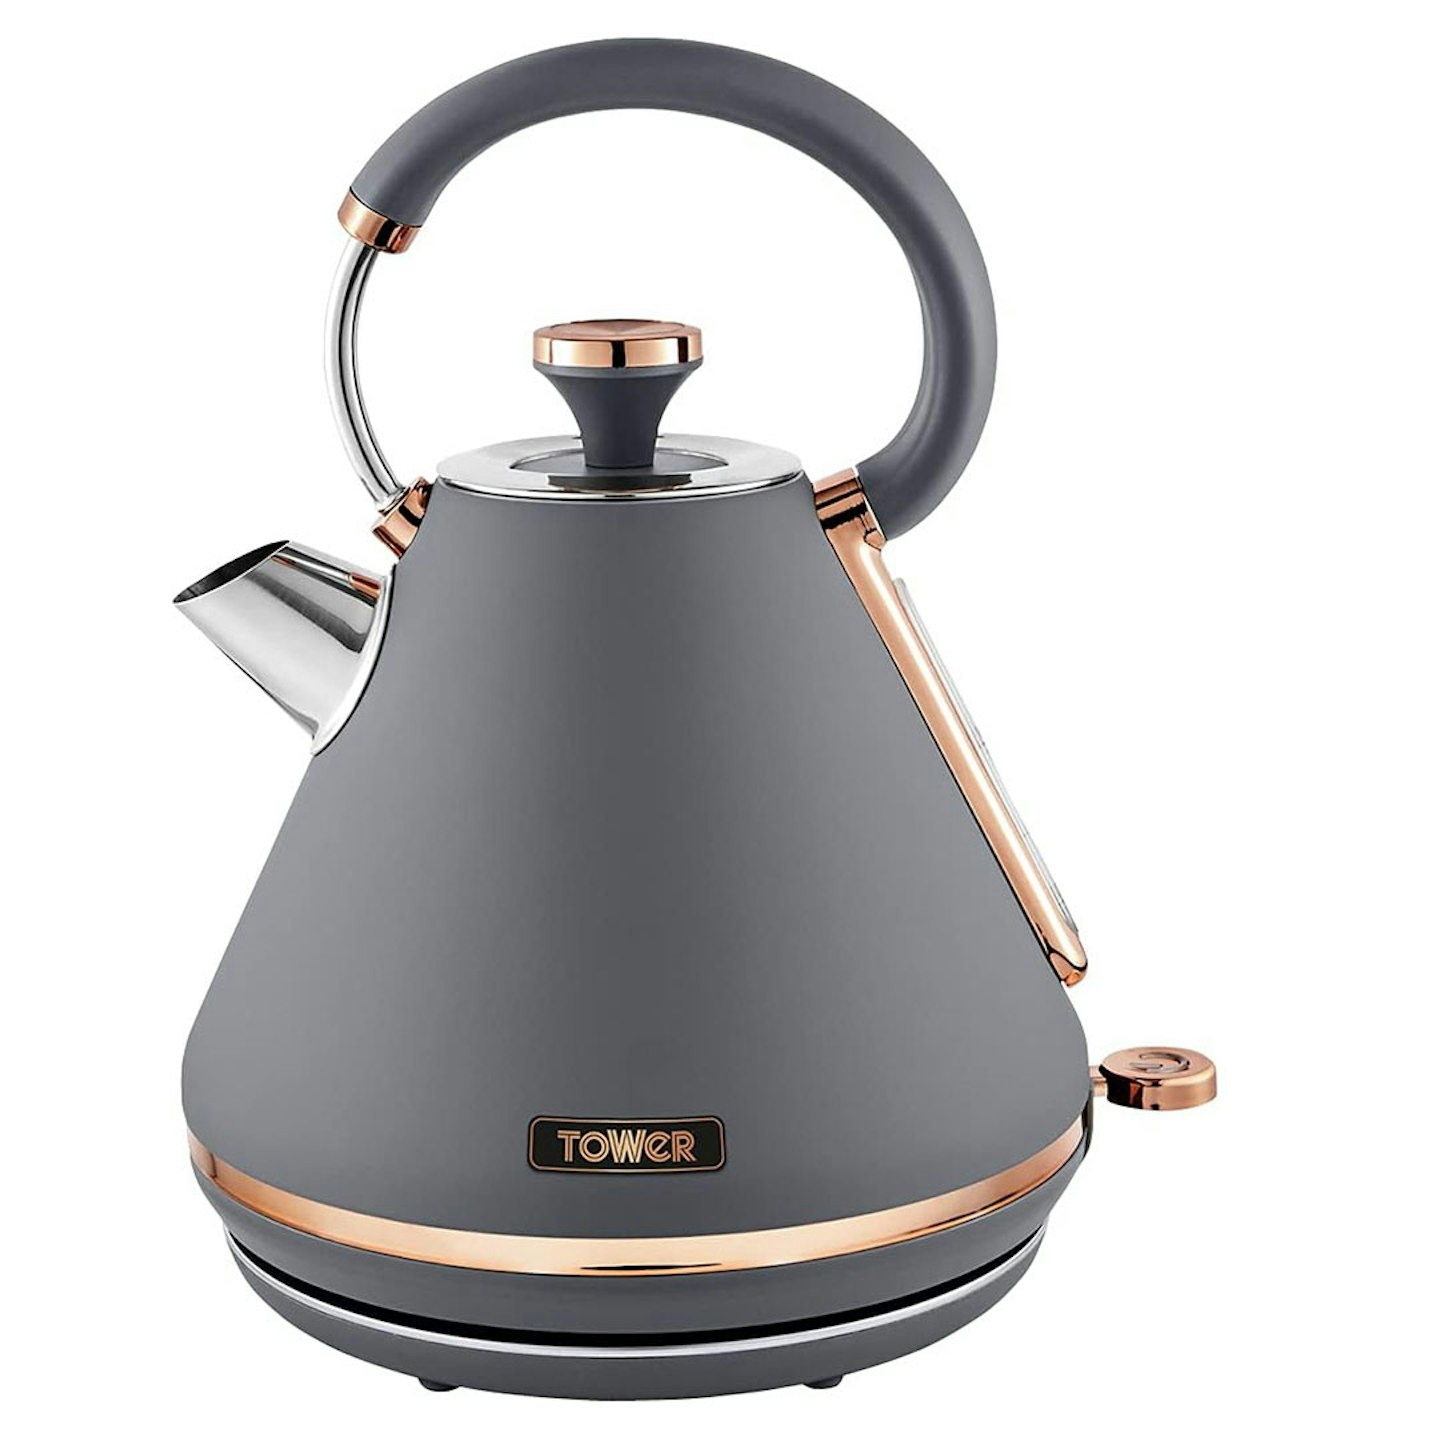 Tower T10044RGG Cavaletto Pyramid Kettle